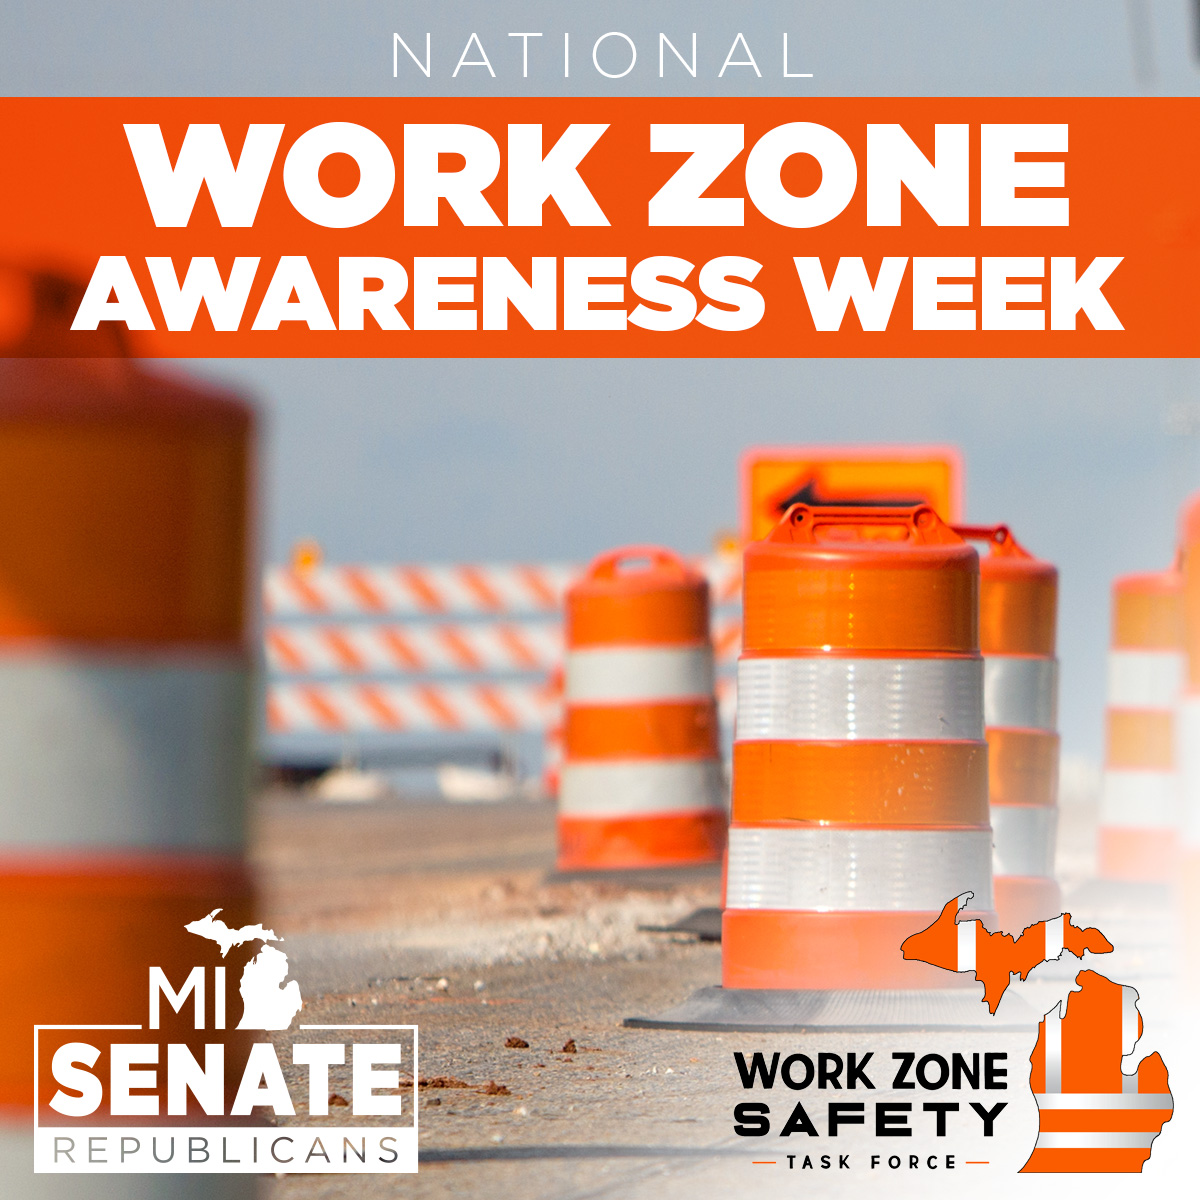 Safe work zones protect both workers and drivers. Michigan has thousands of work zone crashes each year. Be safe on the road and reduce your speed in work zones!